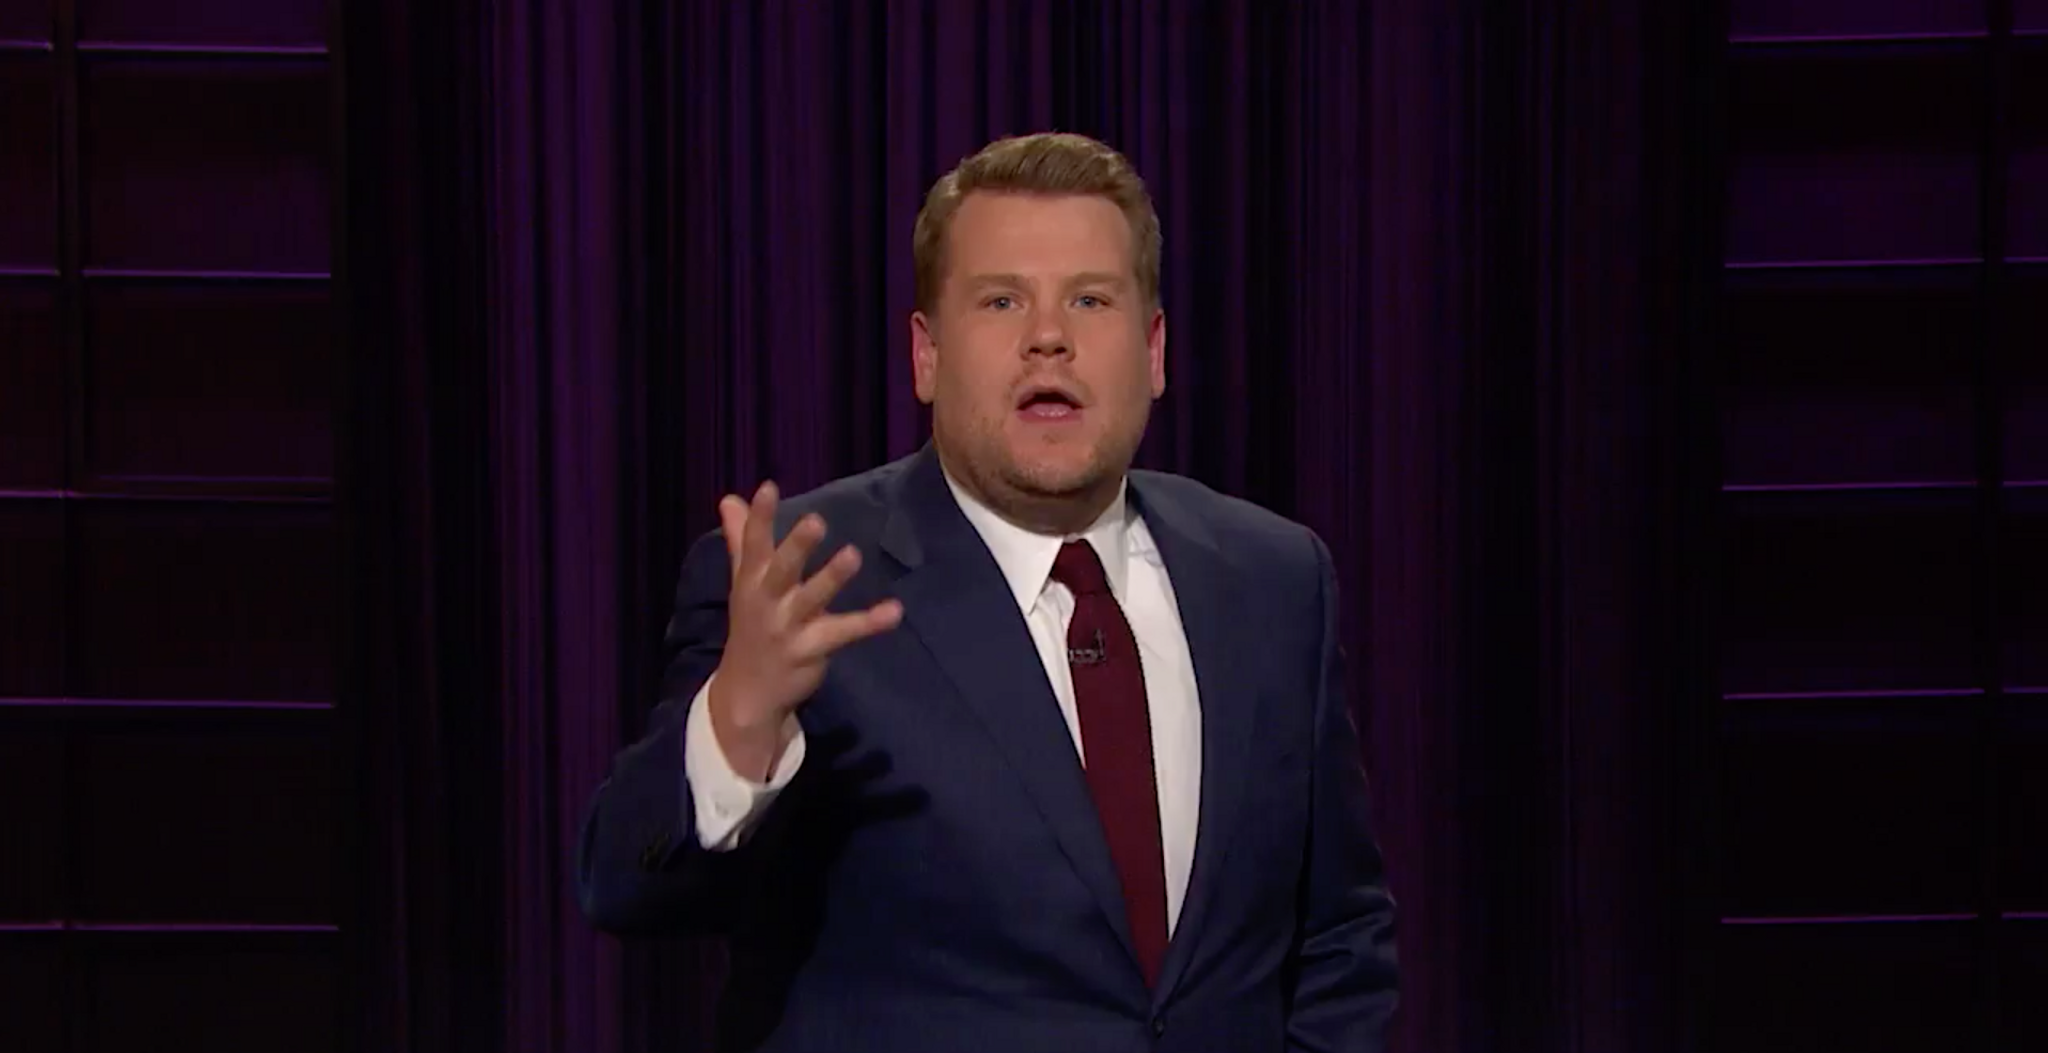 James Corden is releasing a show on Snapchat